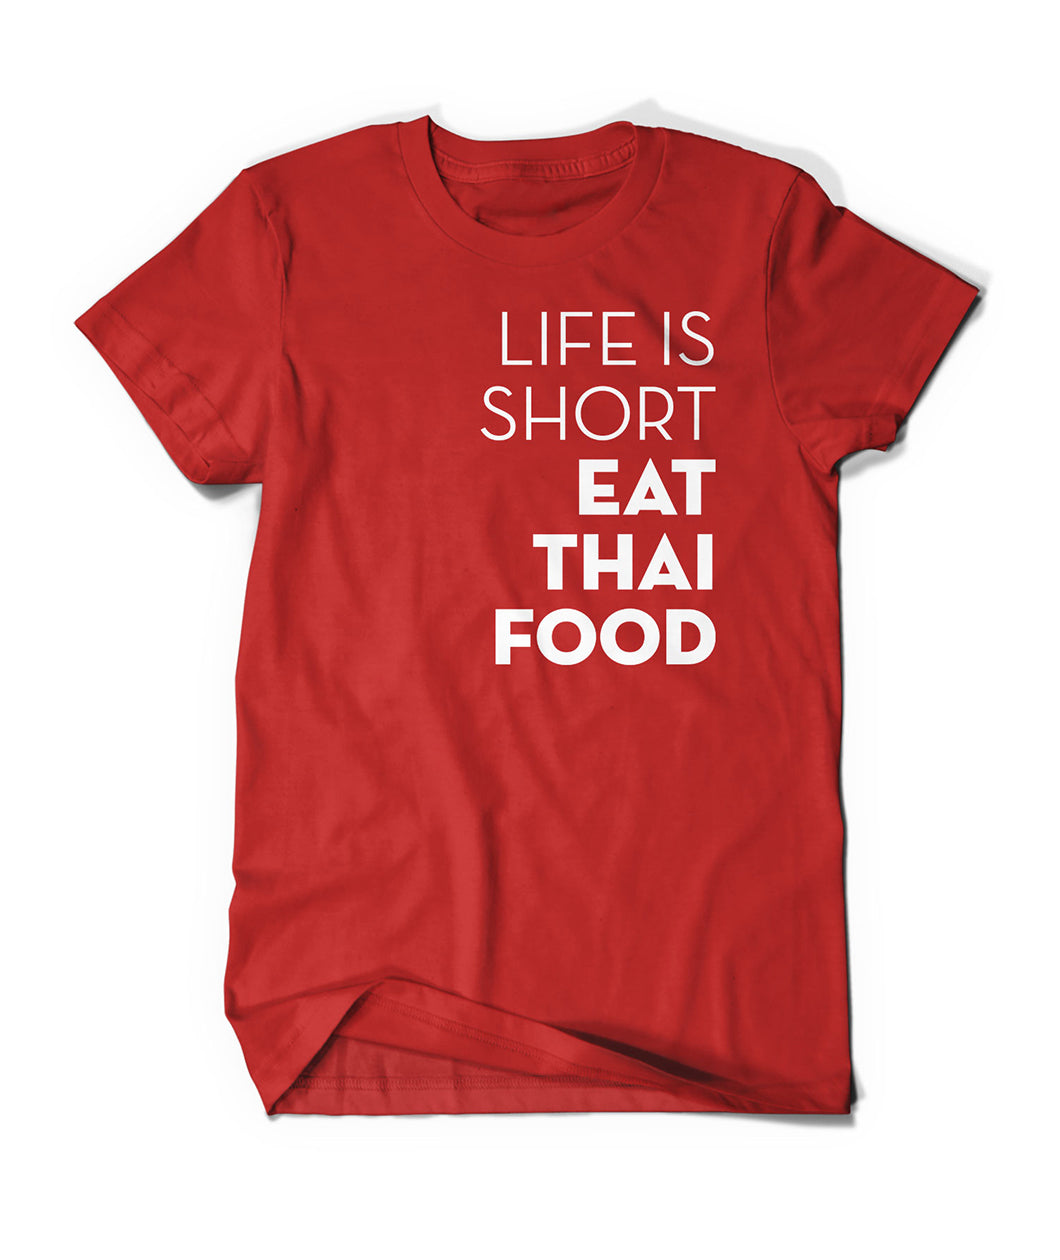 A bright red t-shirt with the words "Life Is Short Eat Thai Food" written down the right side. From Hot Thai Kitchen.